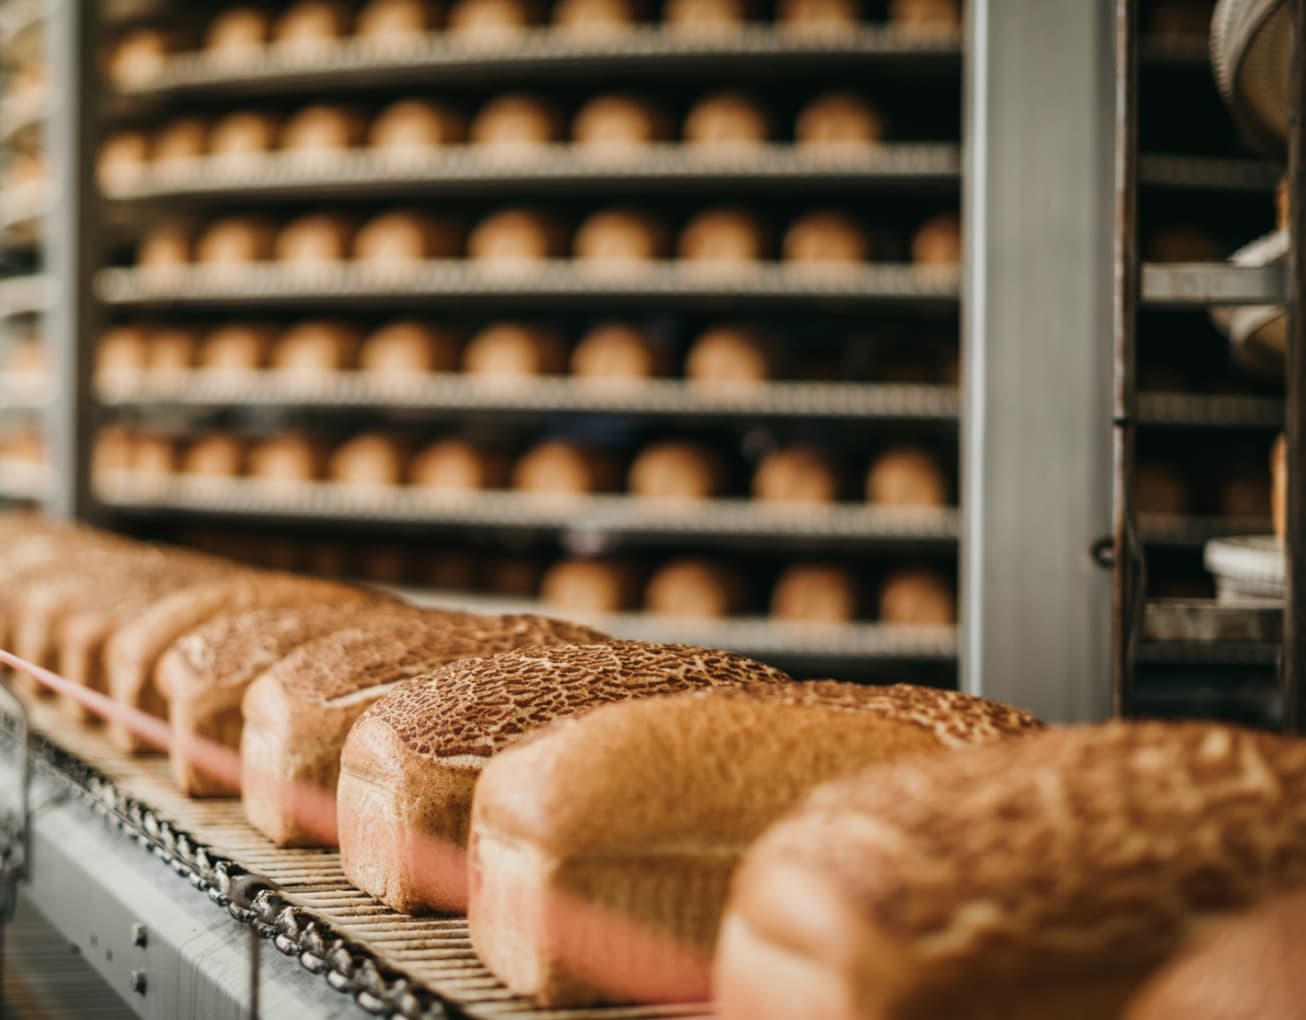 Bakery produces mass batches of bread